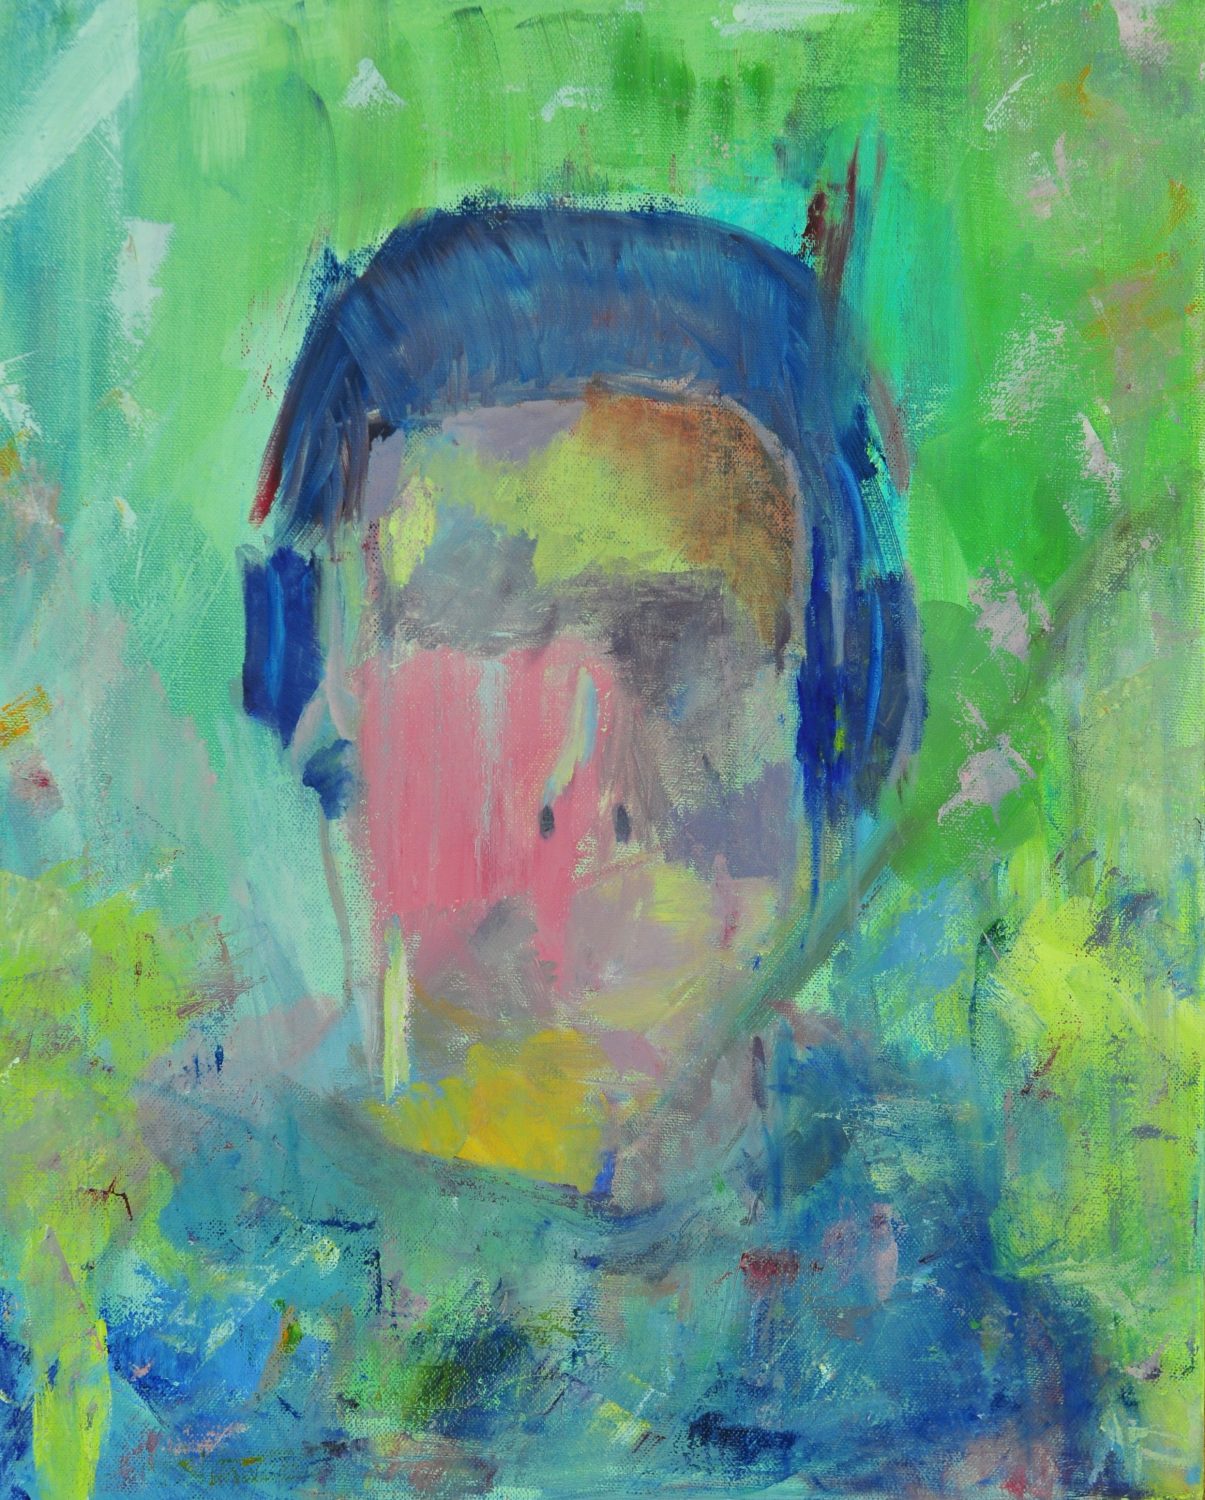 thumbnail of Blur by Oscar Ma. Medium: Oil on Canvas. Size 20 x 16 inches Date 2014